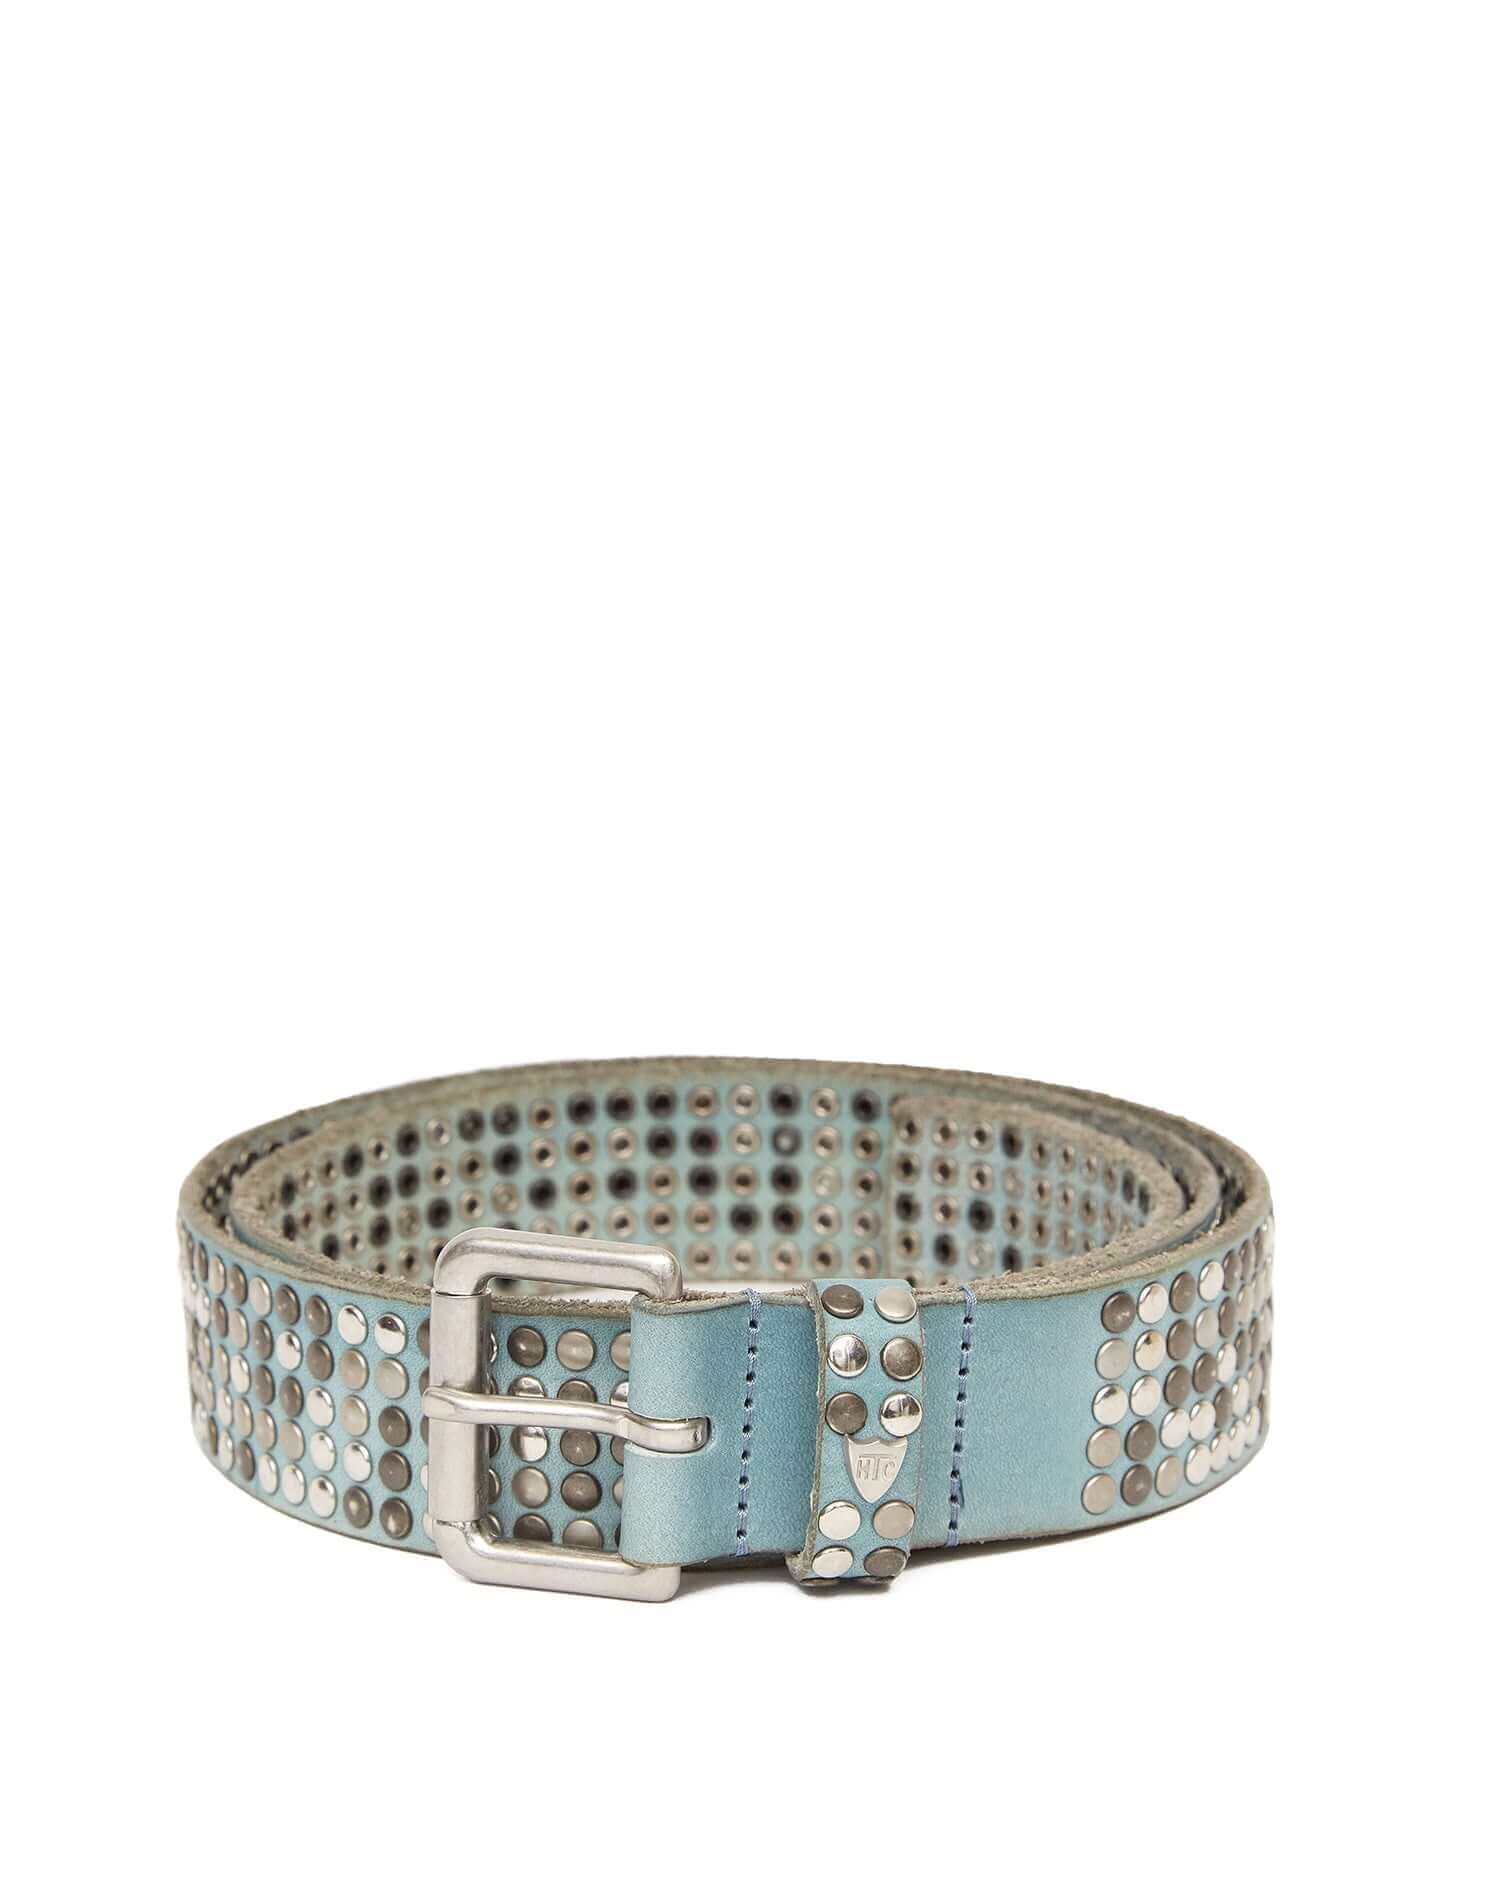 5.000 STUDS COLOR BELT LIght blue leather belt with mixed studs, brass buckle, studded zamac belt loop with HTC logo rivet. Height: 3.5 cm. Made in Italy. HTC LOS ANGELES